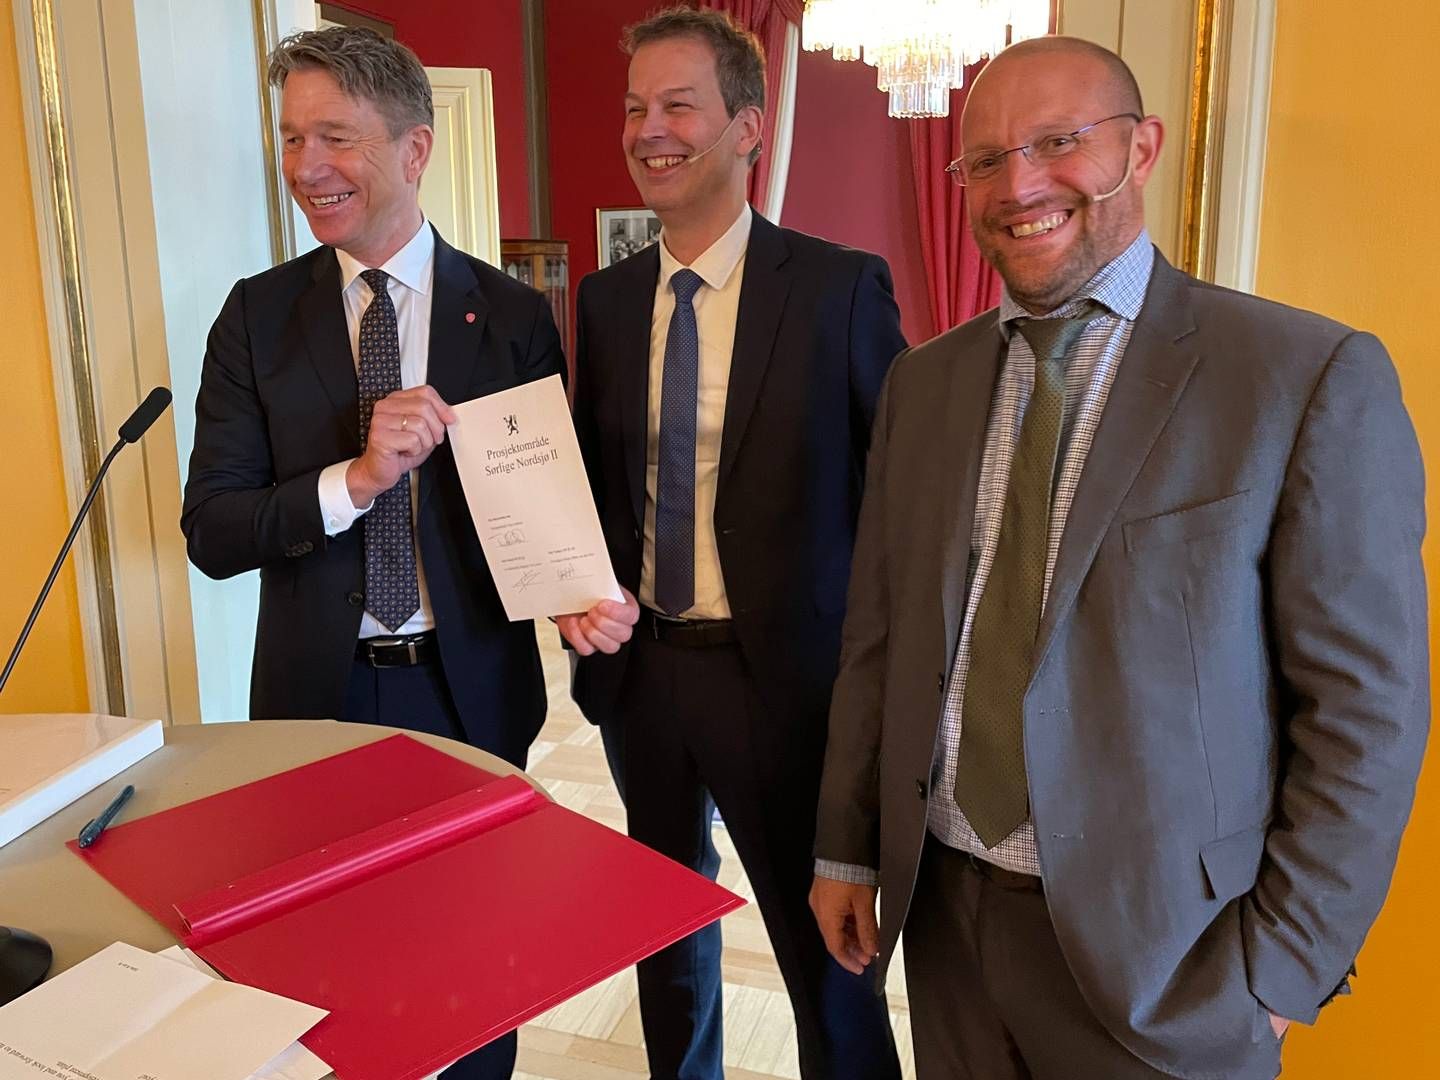 Parkwind and Ingka Investments celebrated a team victory last Friday, but are now on different teams. Ingka Investments CEO Peter van der Poel stands between Parkwind CEO François Van Leeuw (right) and Norwegian Energy Minister Terje Aasland.